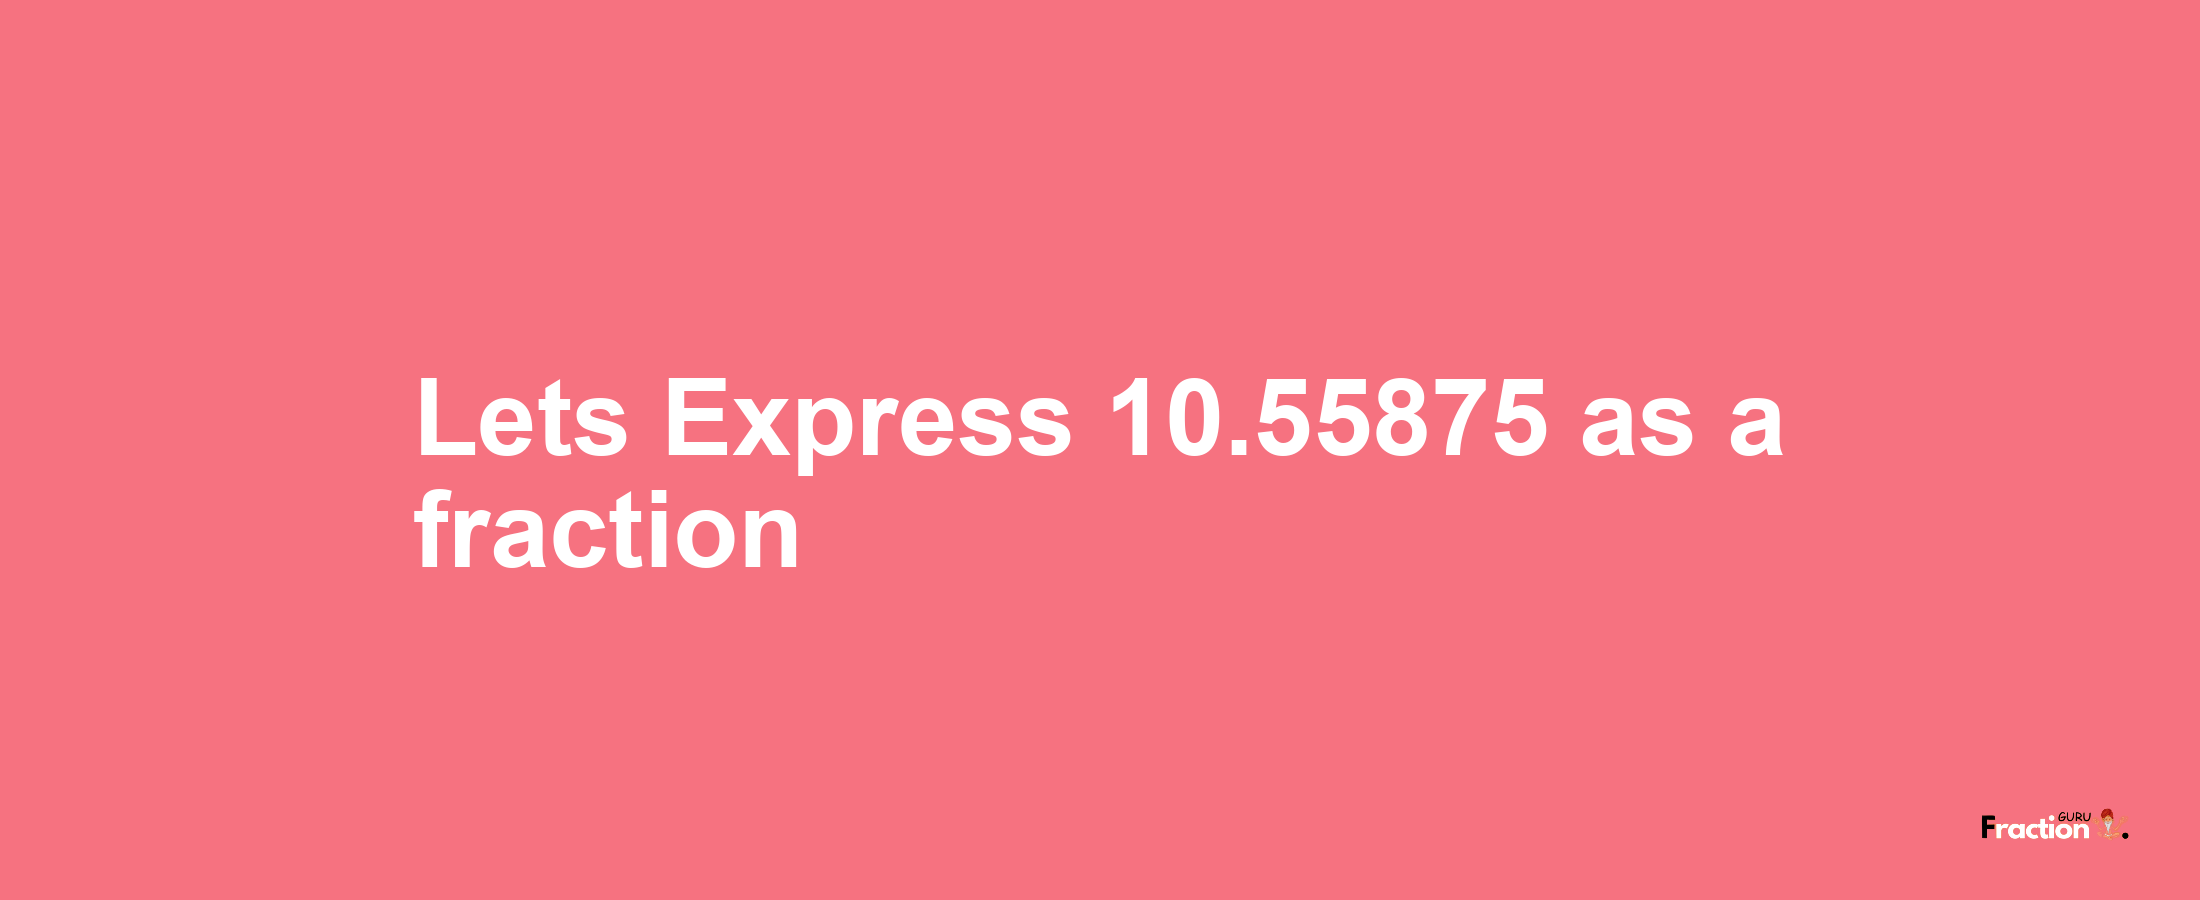 Lets Express 10.55875 as afraction